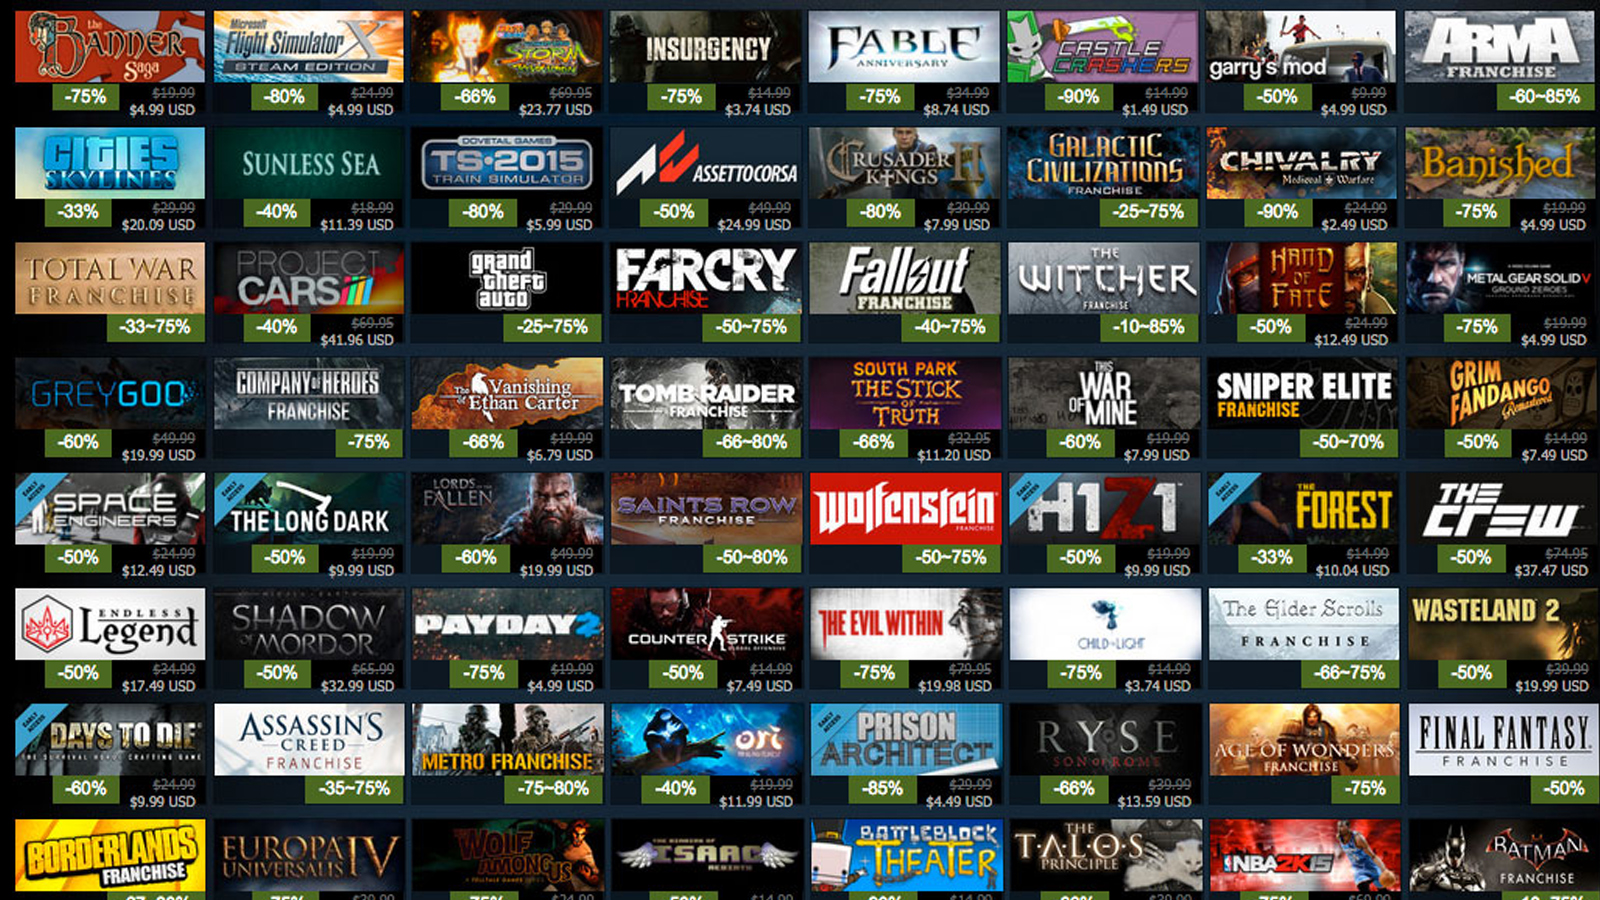 Steam players can now earn coupons for new games by playing old ones